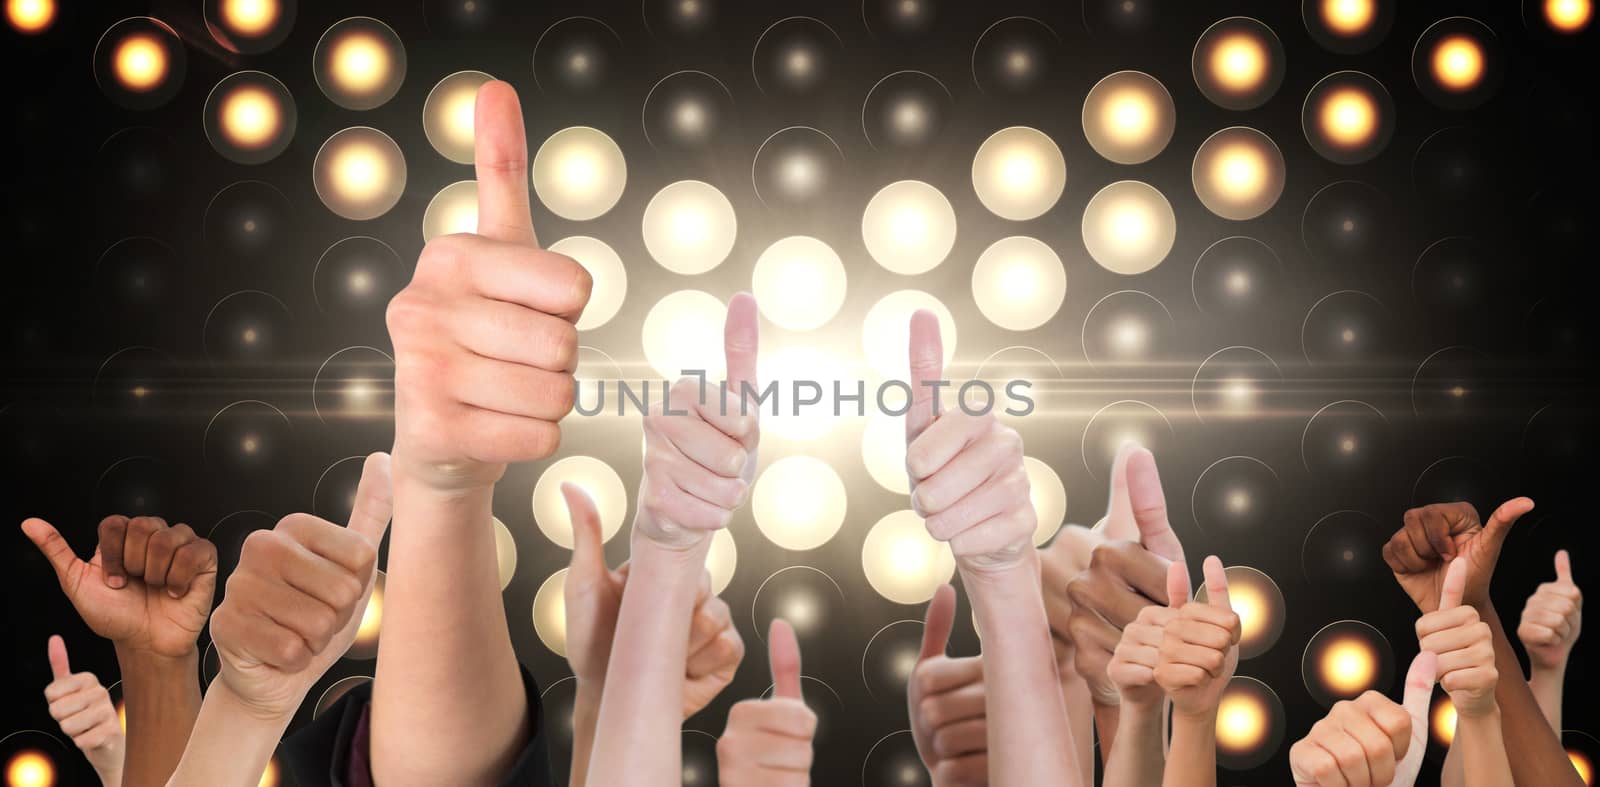 Hands showing thumbs up against digitally generated disco light background